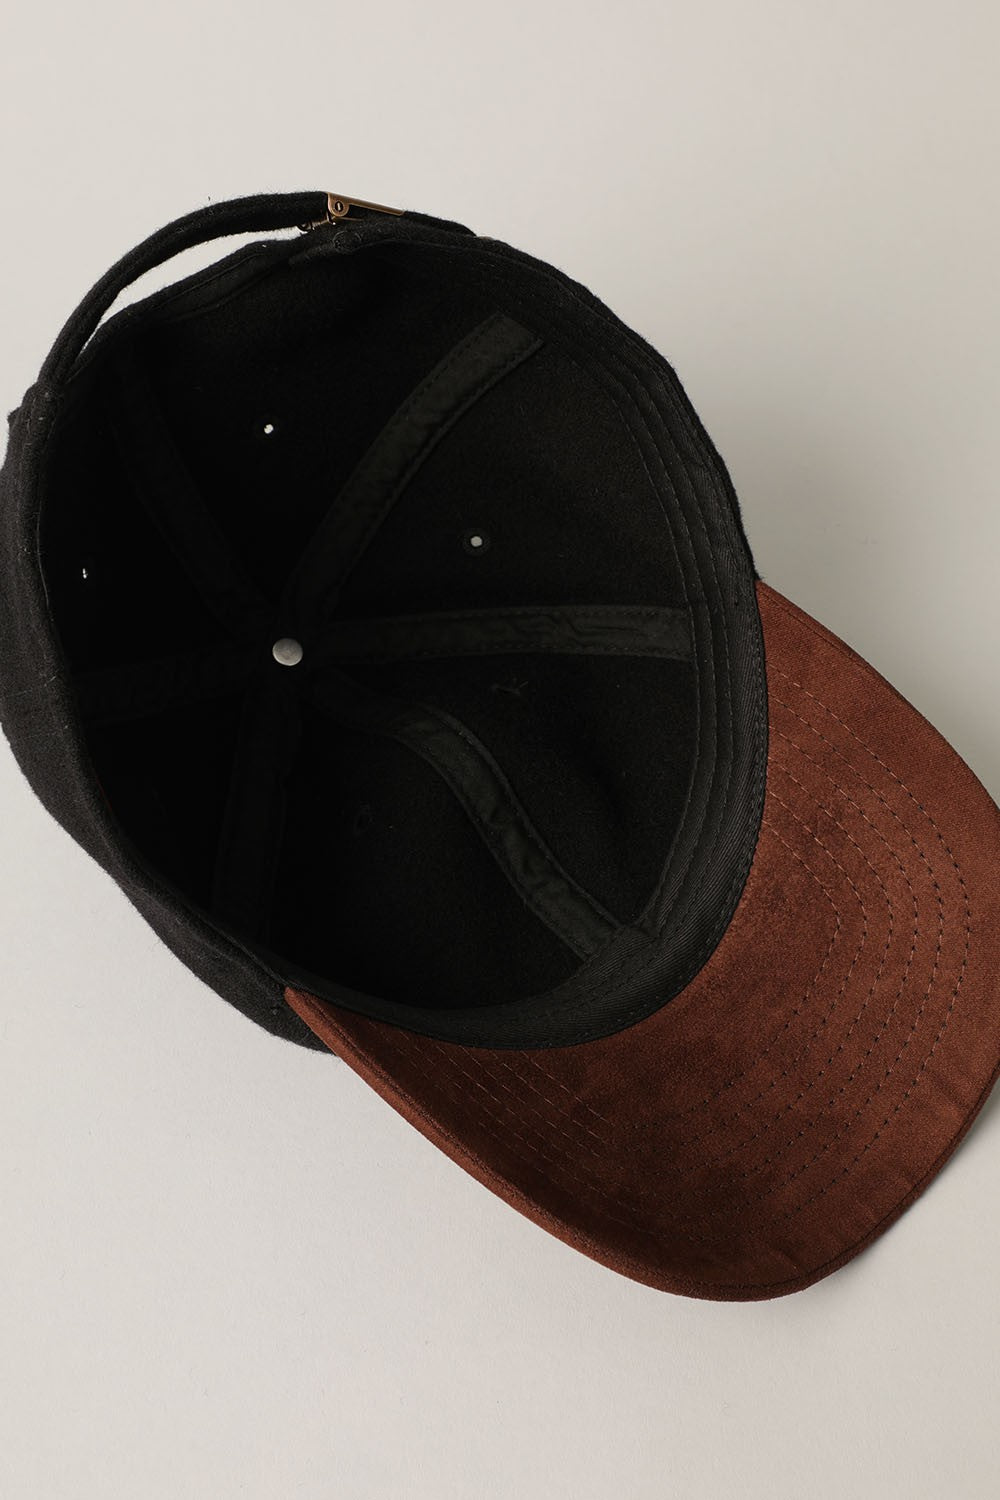 Wool Blend Crown and Synthetic Suede Visor Adjustable Metal Buckle Strap Closure 50% Wool, 50% Polyester